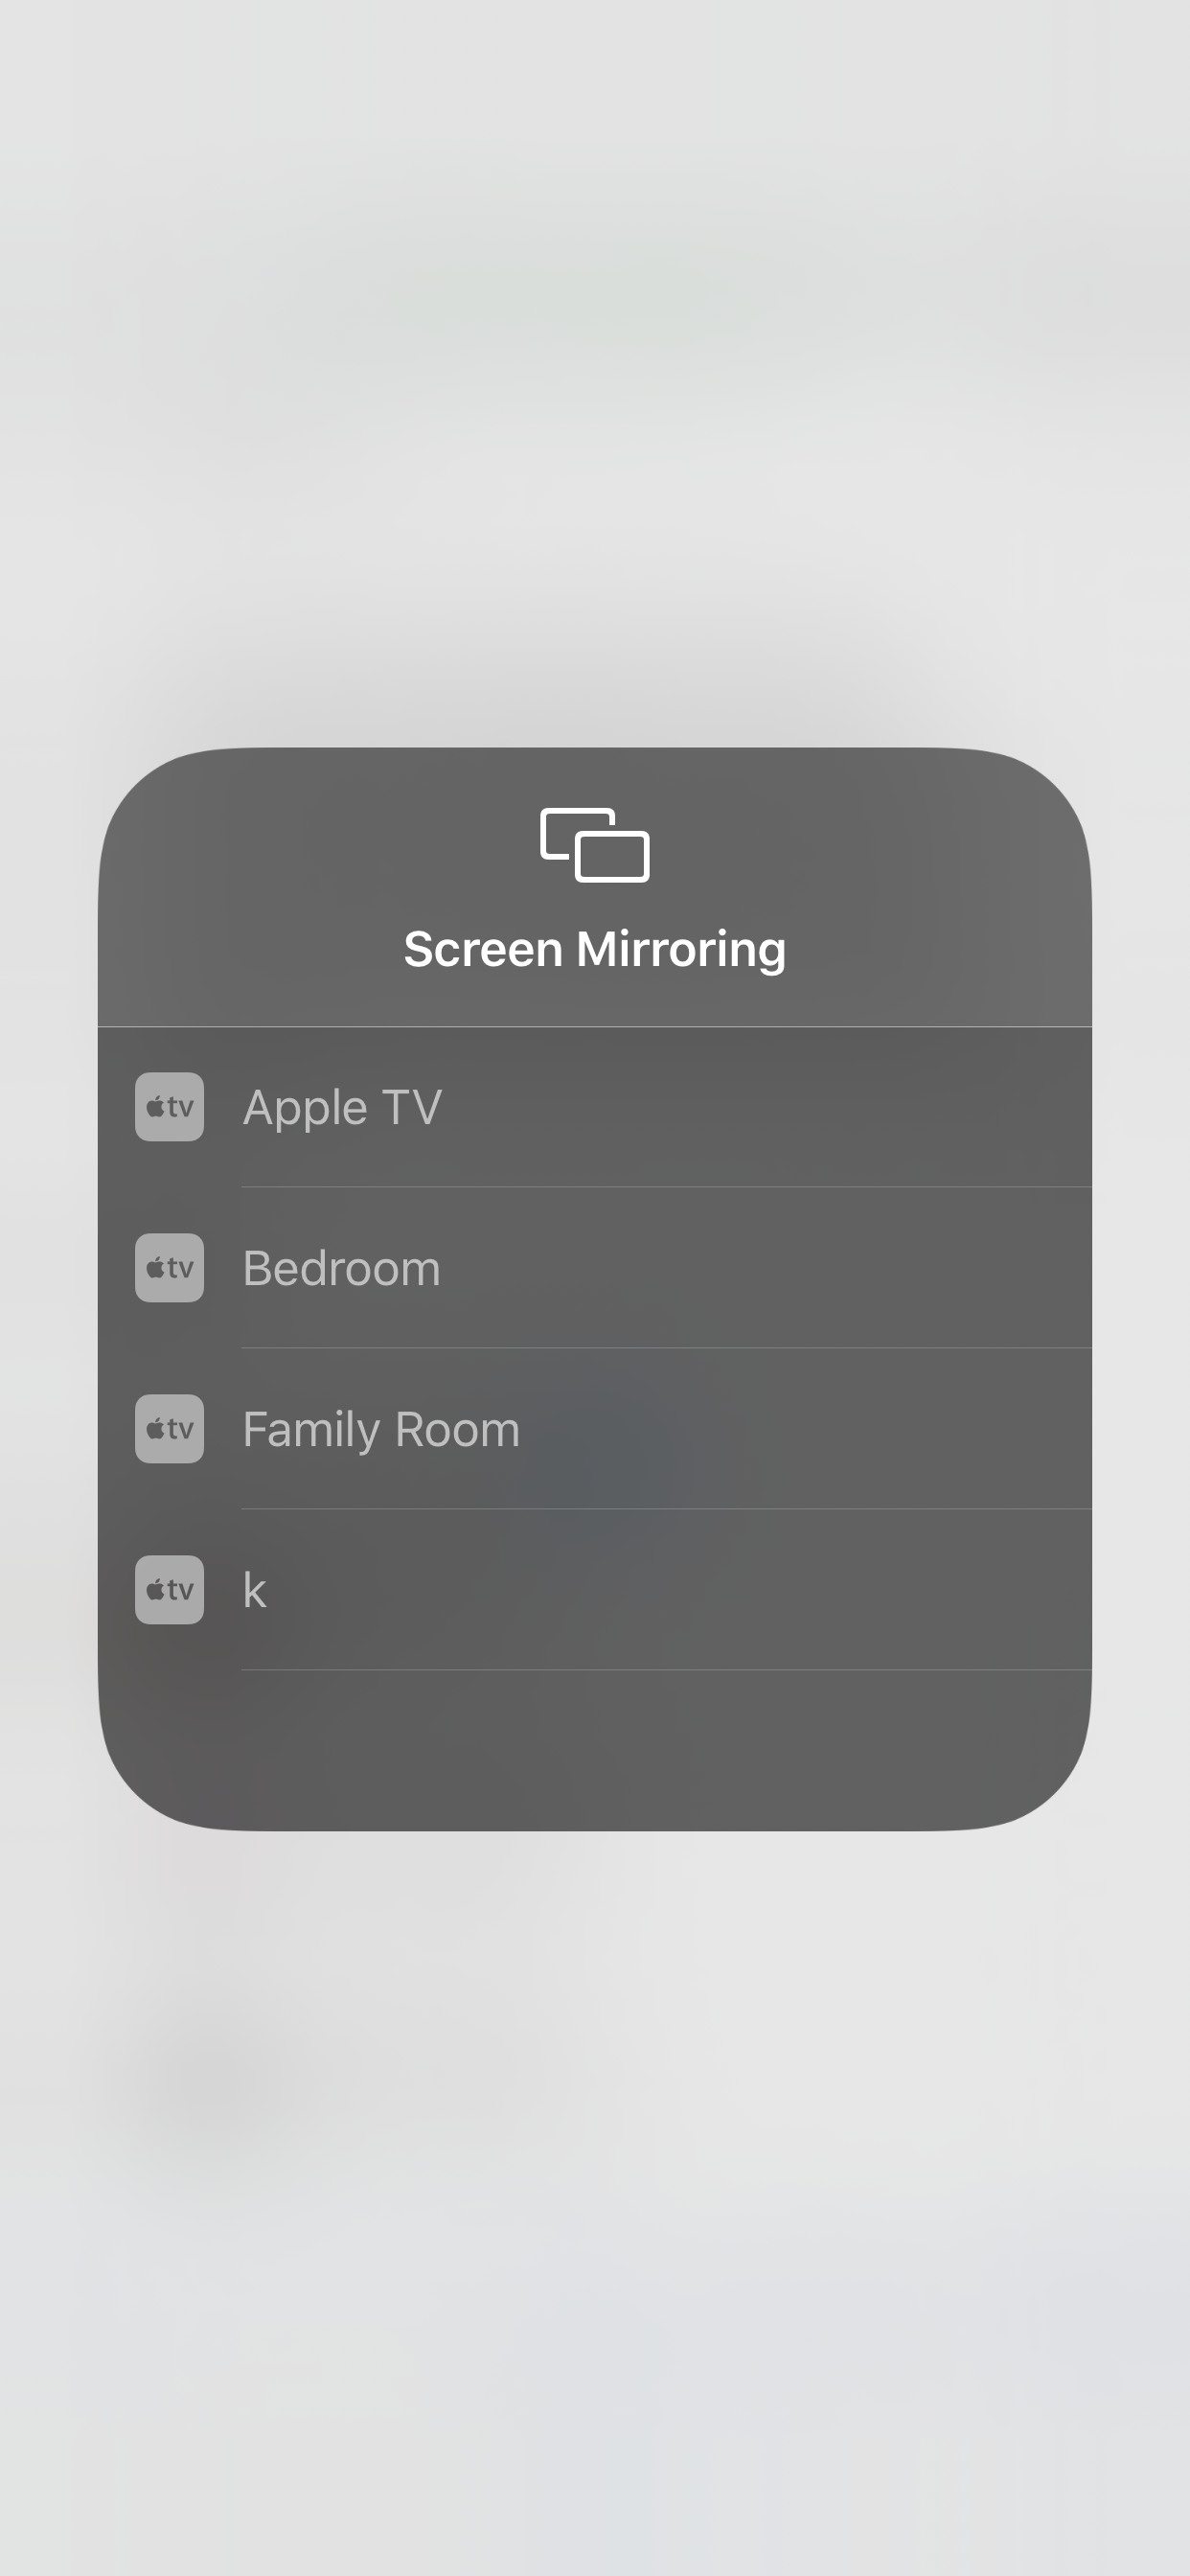 Remove Screen Mirroring Device Apple, Can You Only Screen Mirror With Apple Tv